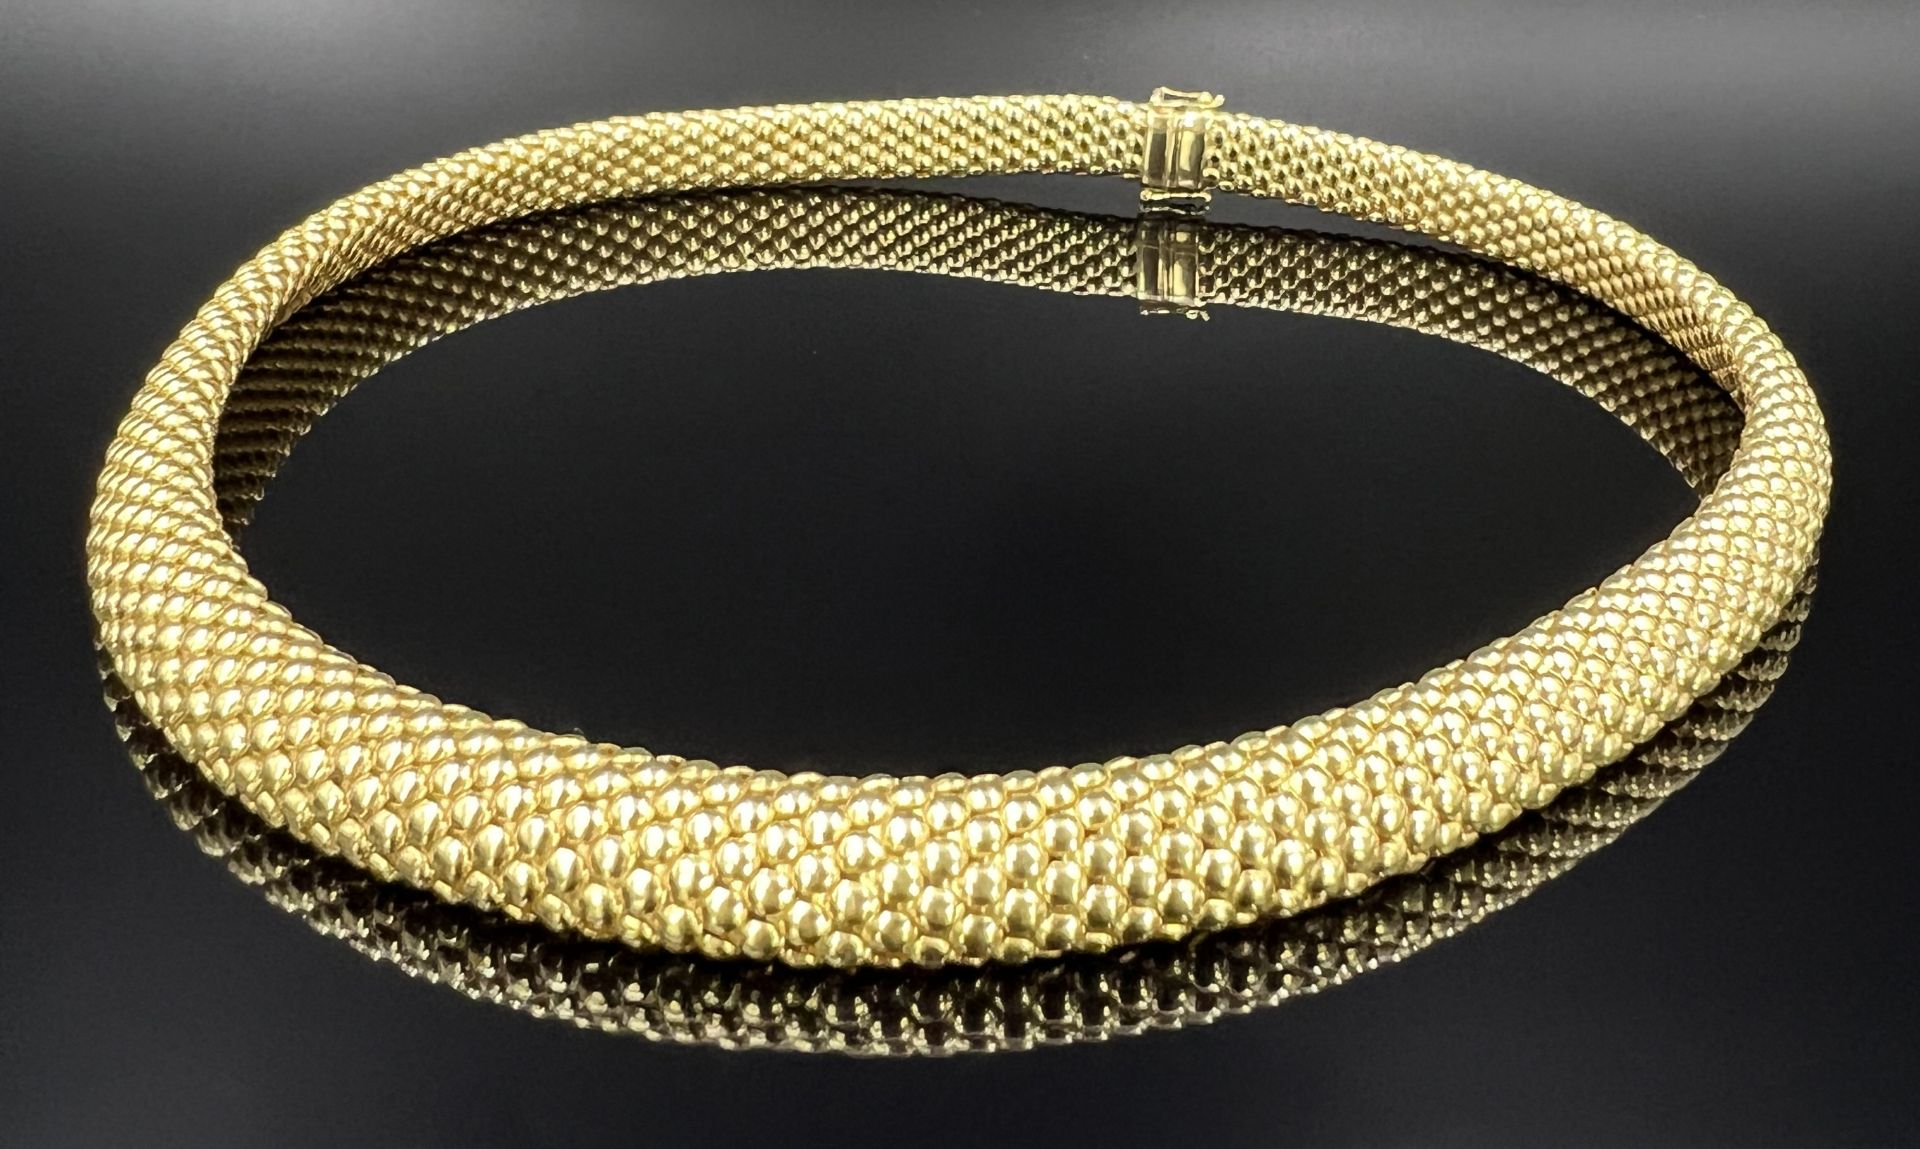 Solid necklace / choker. 750 yellow gold.